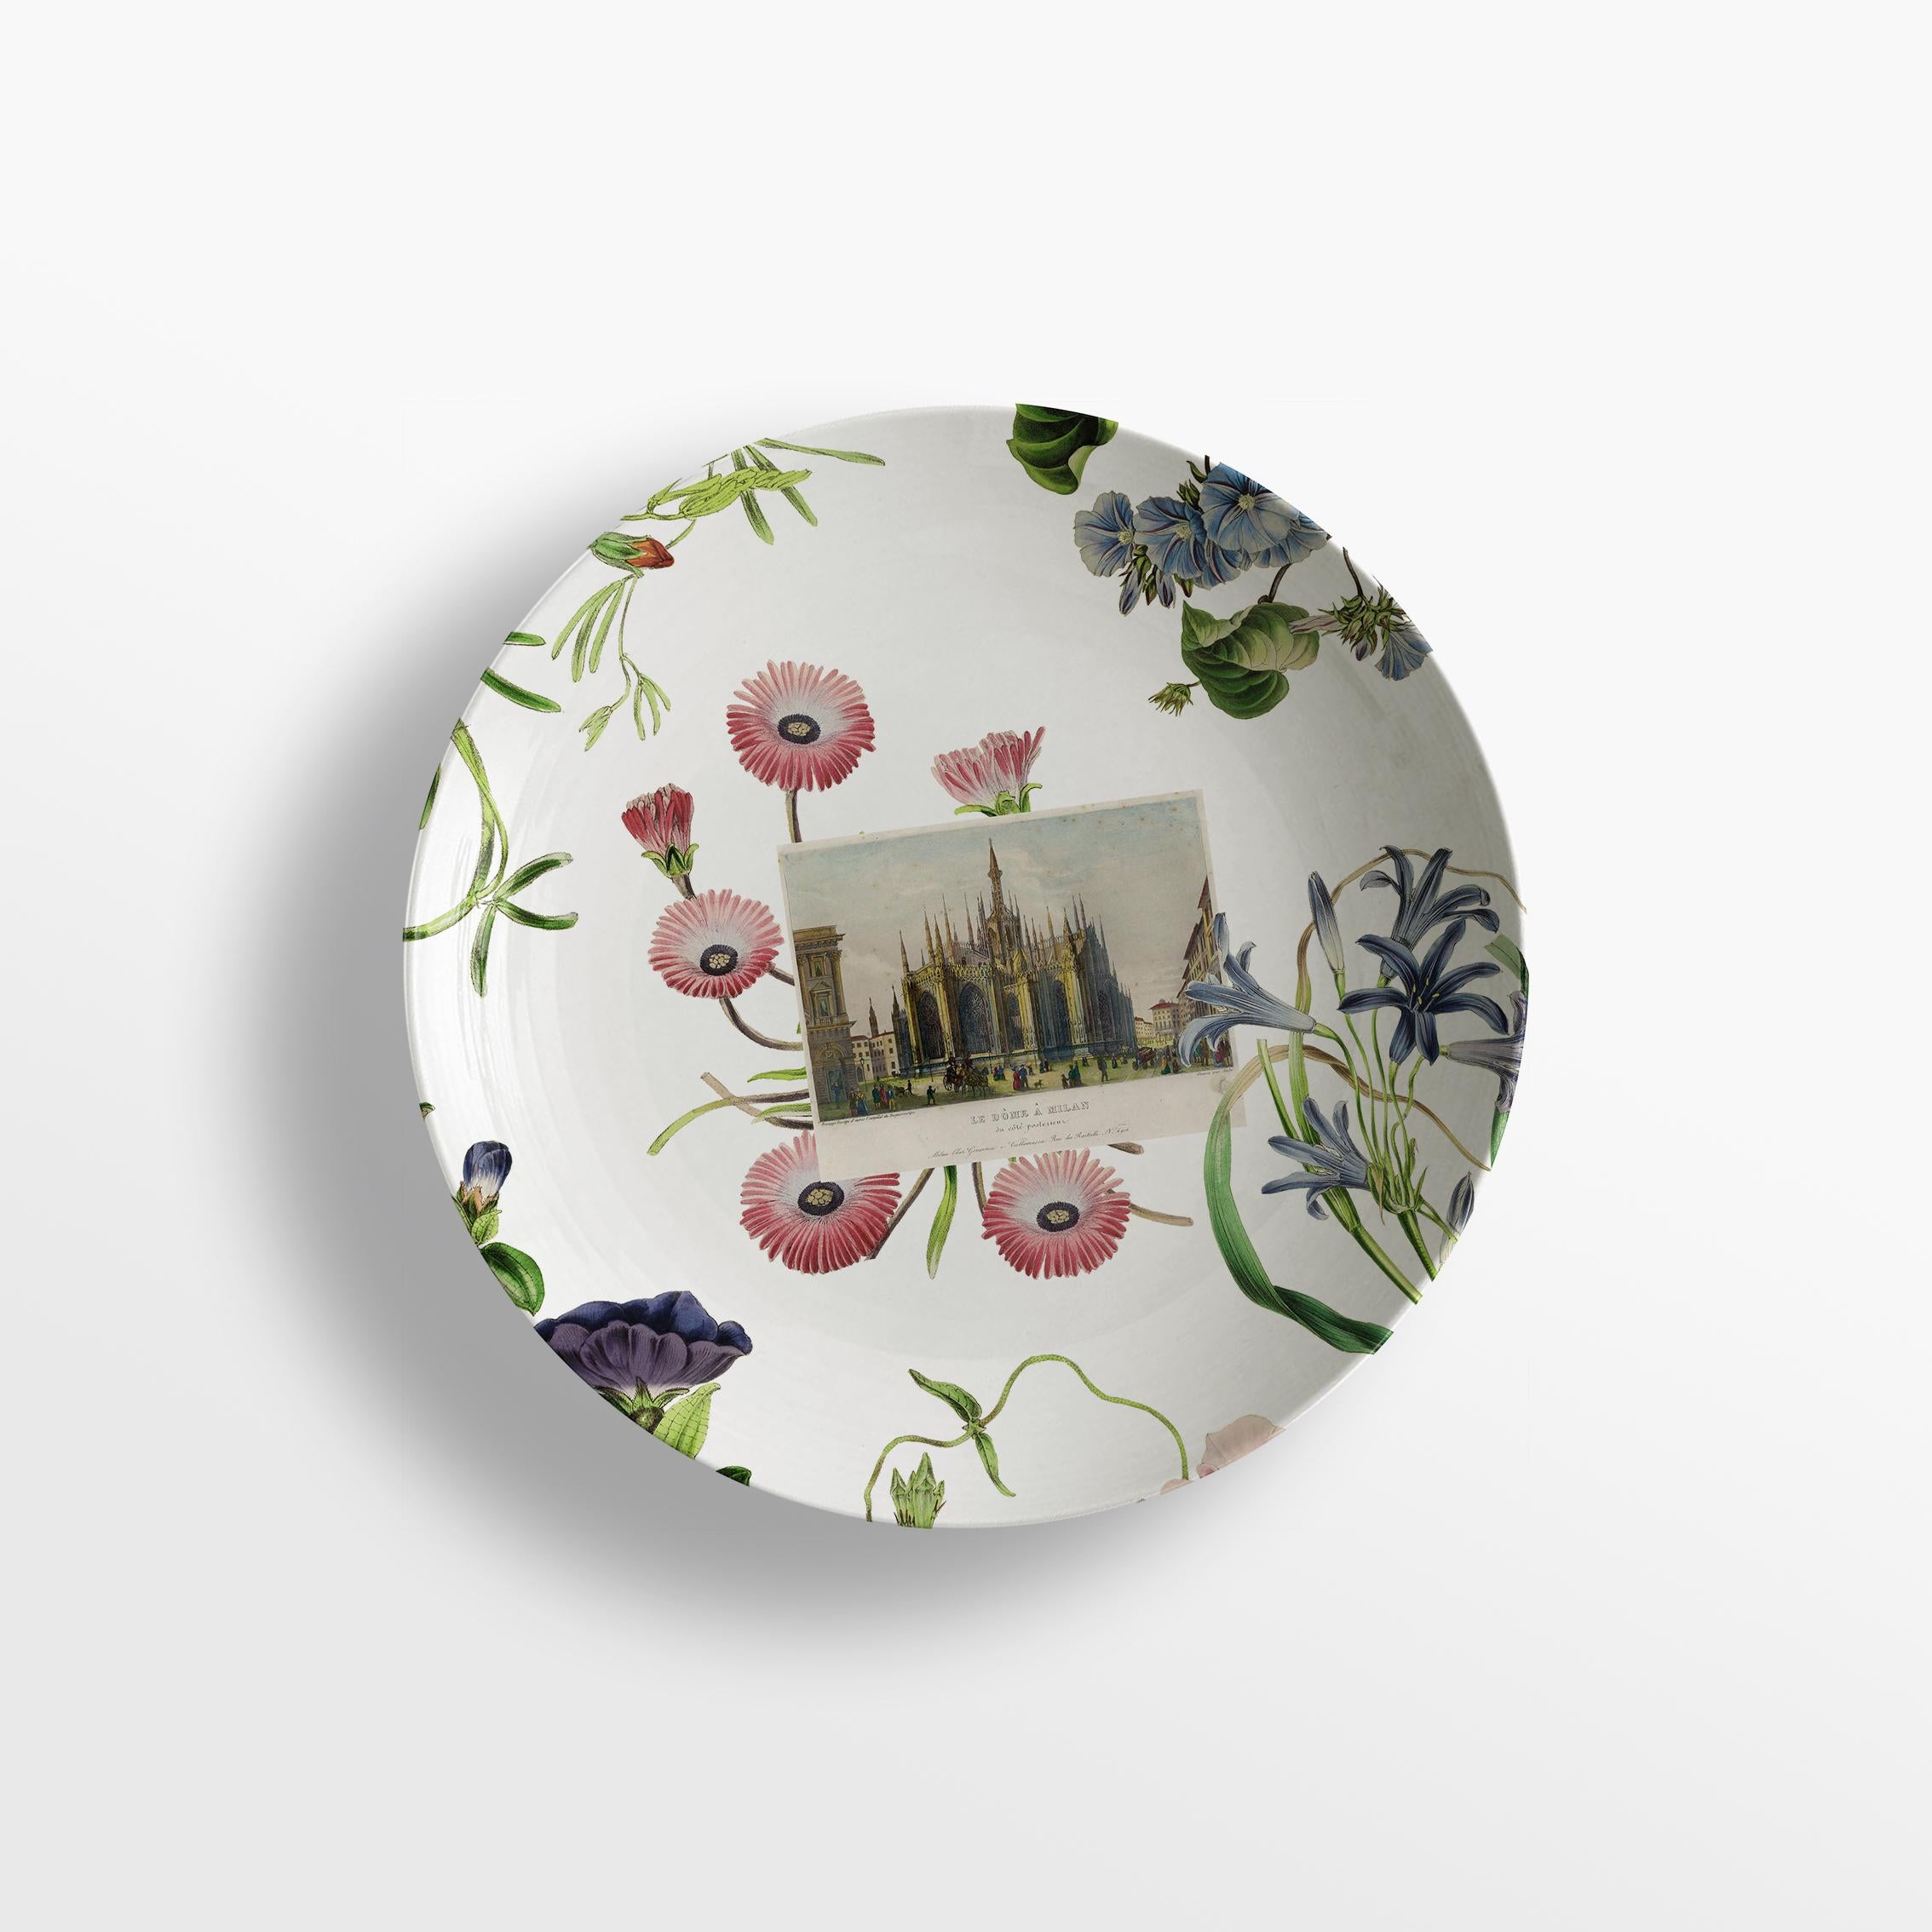 From the encounter between the historical archives of the Duomo di Milano and the imagery of Grand Tour by Vito Nesta, this unique collections of porcelains and fabrics were born. “La storia Infinita” is a dedication to all that work of study and